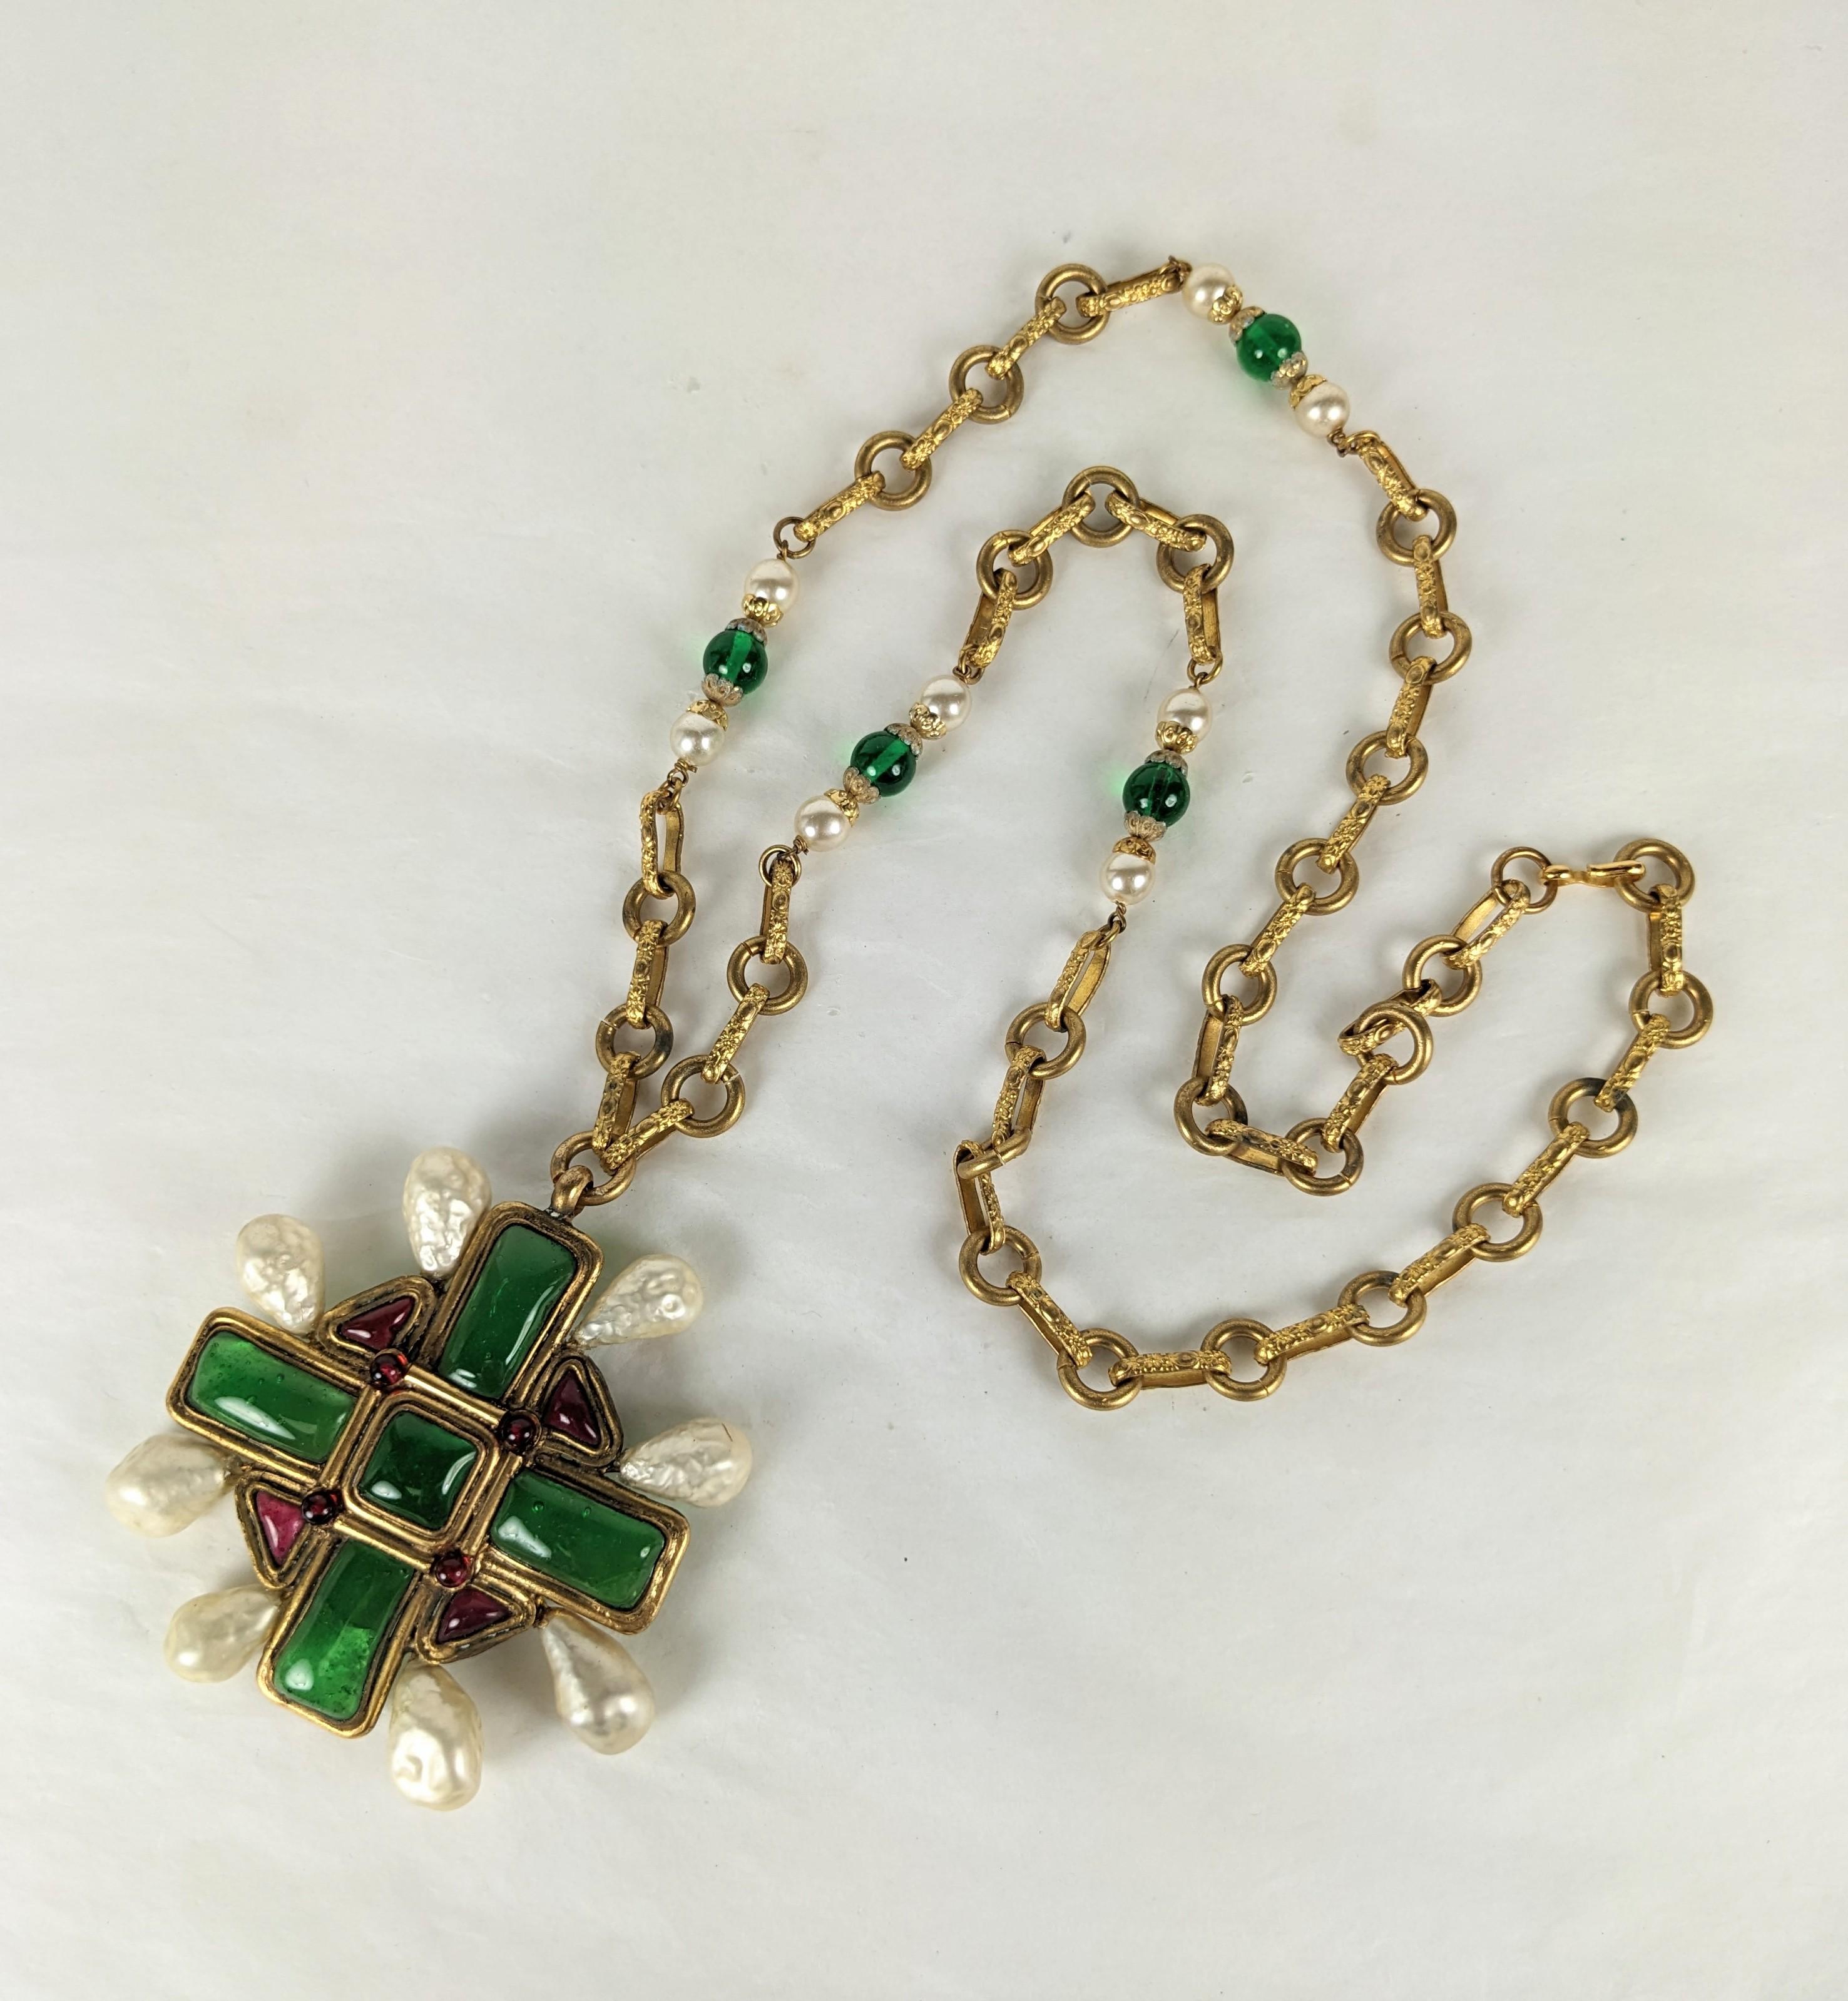 Extraordinary Rare and Important Maison Gripoix for Coco Chanel elaborate handmade Byzantine crucifix pendant necklace. The focal crucifix of ruby and emerald Gripoix poured glass enamel and small ruby cabocheons, with eight pear shape faux baroque